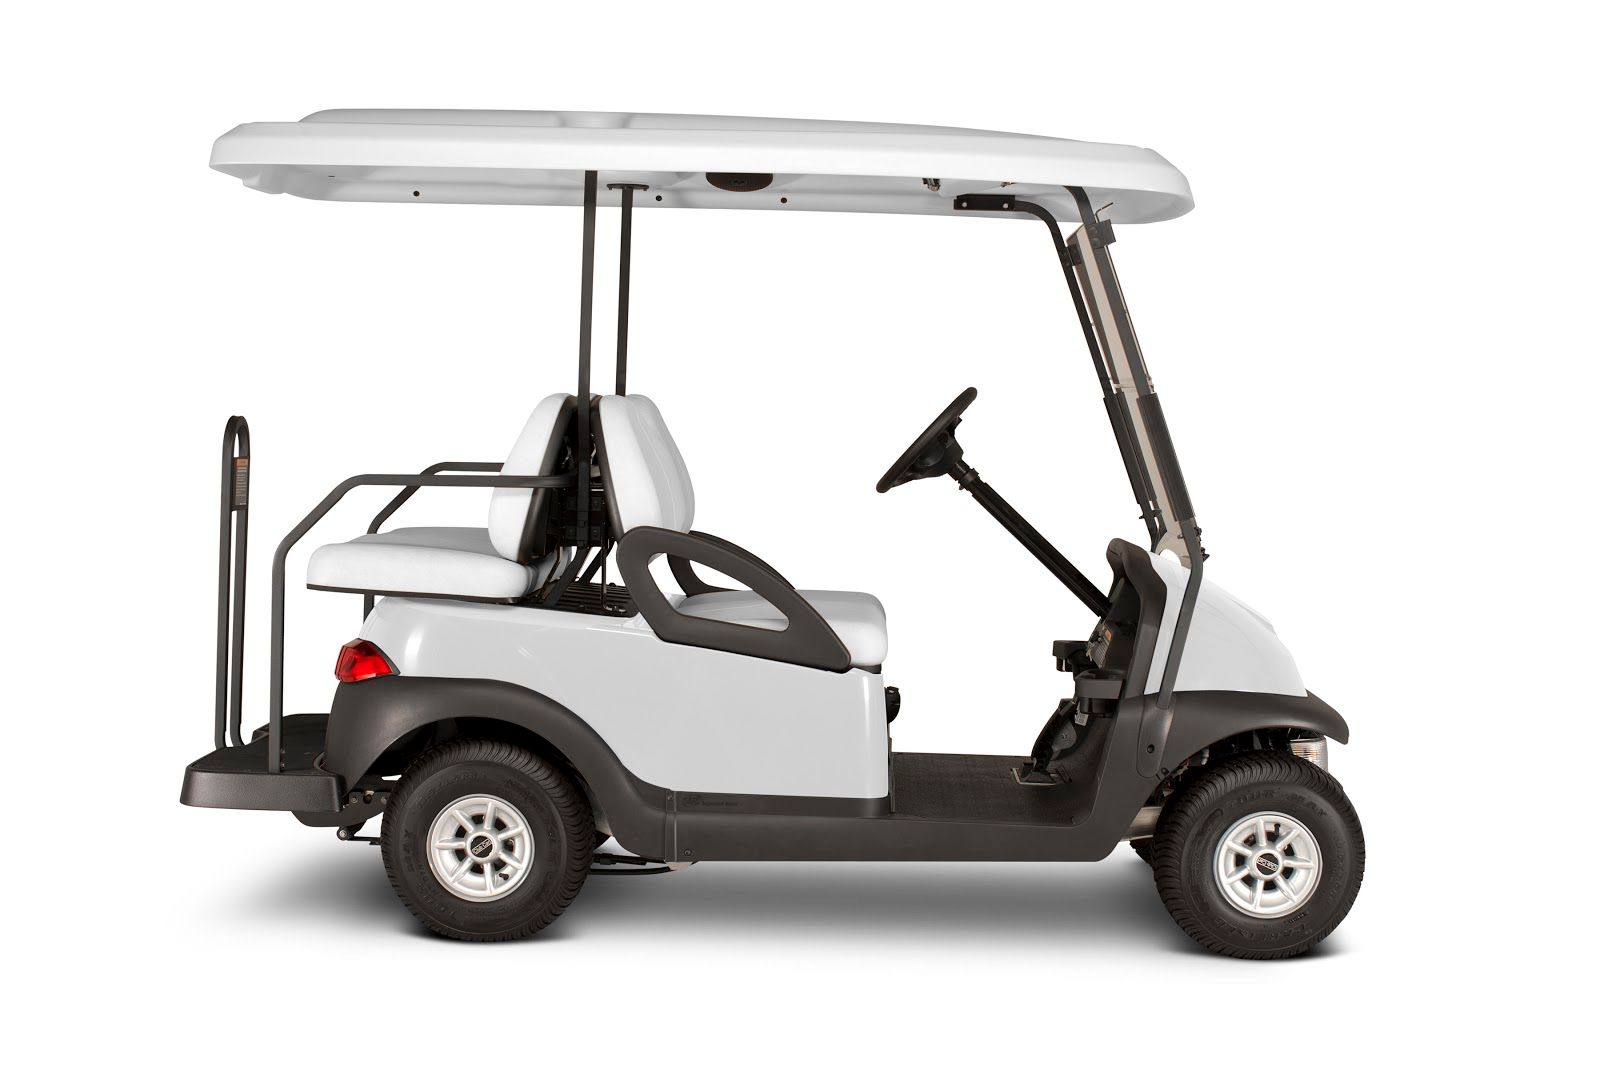 New Golf Carts For Sale in Winston Salem, NC.